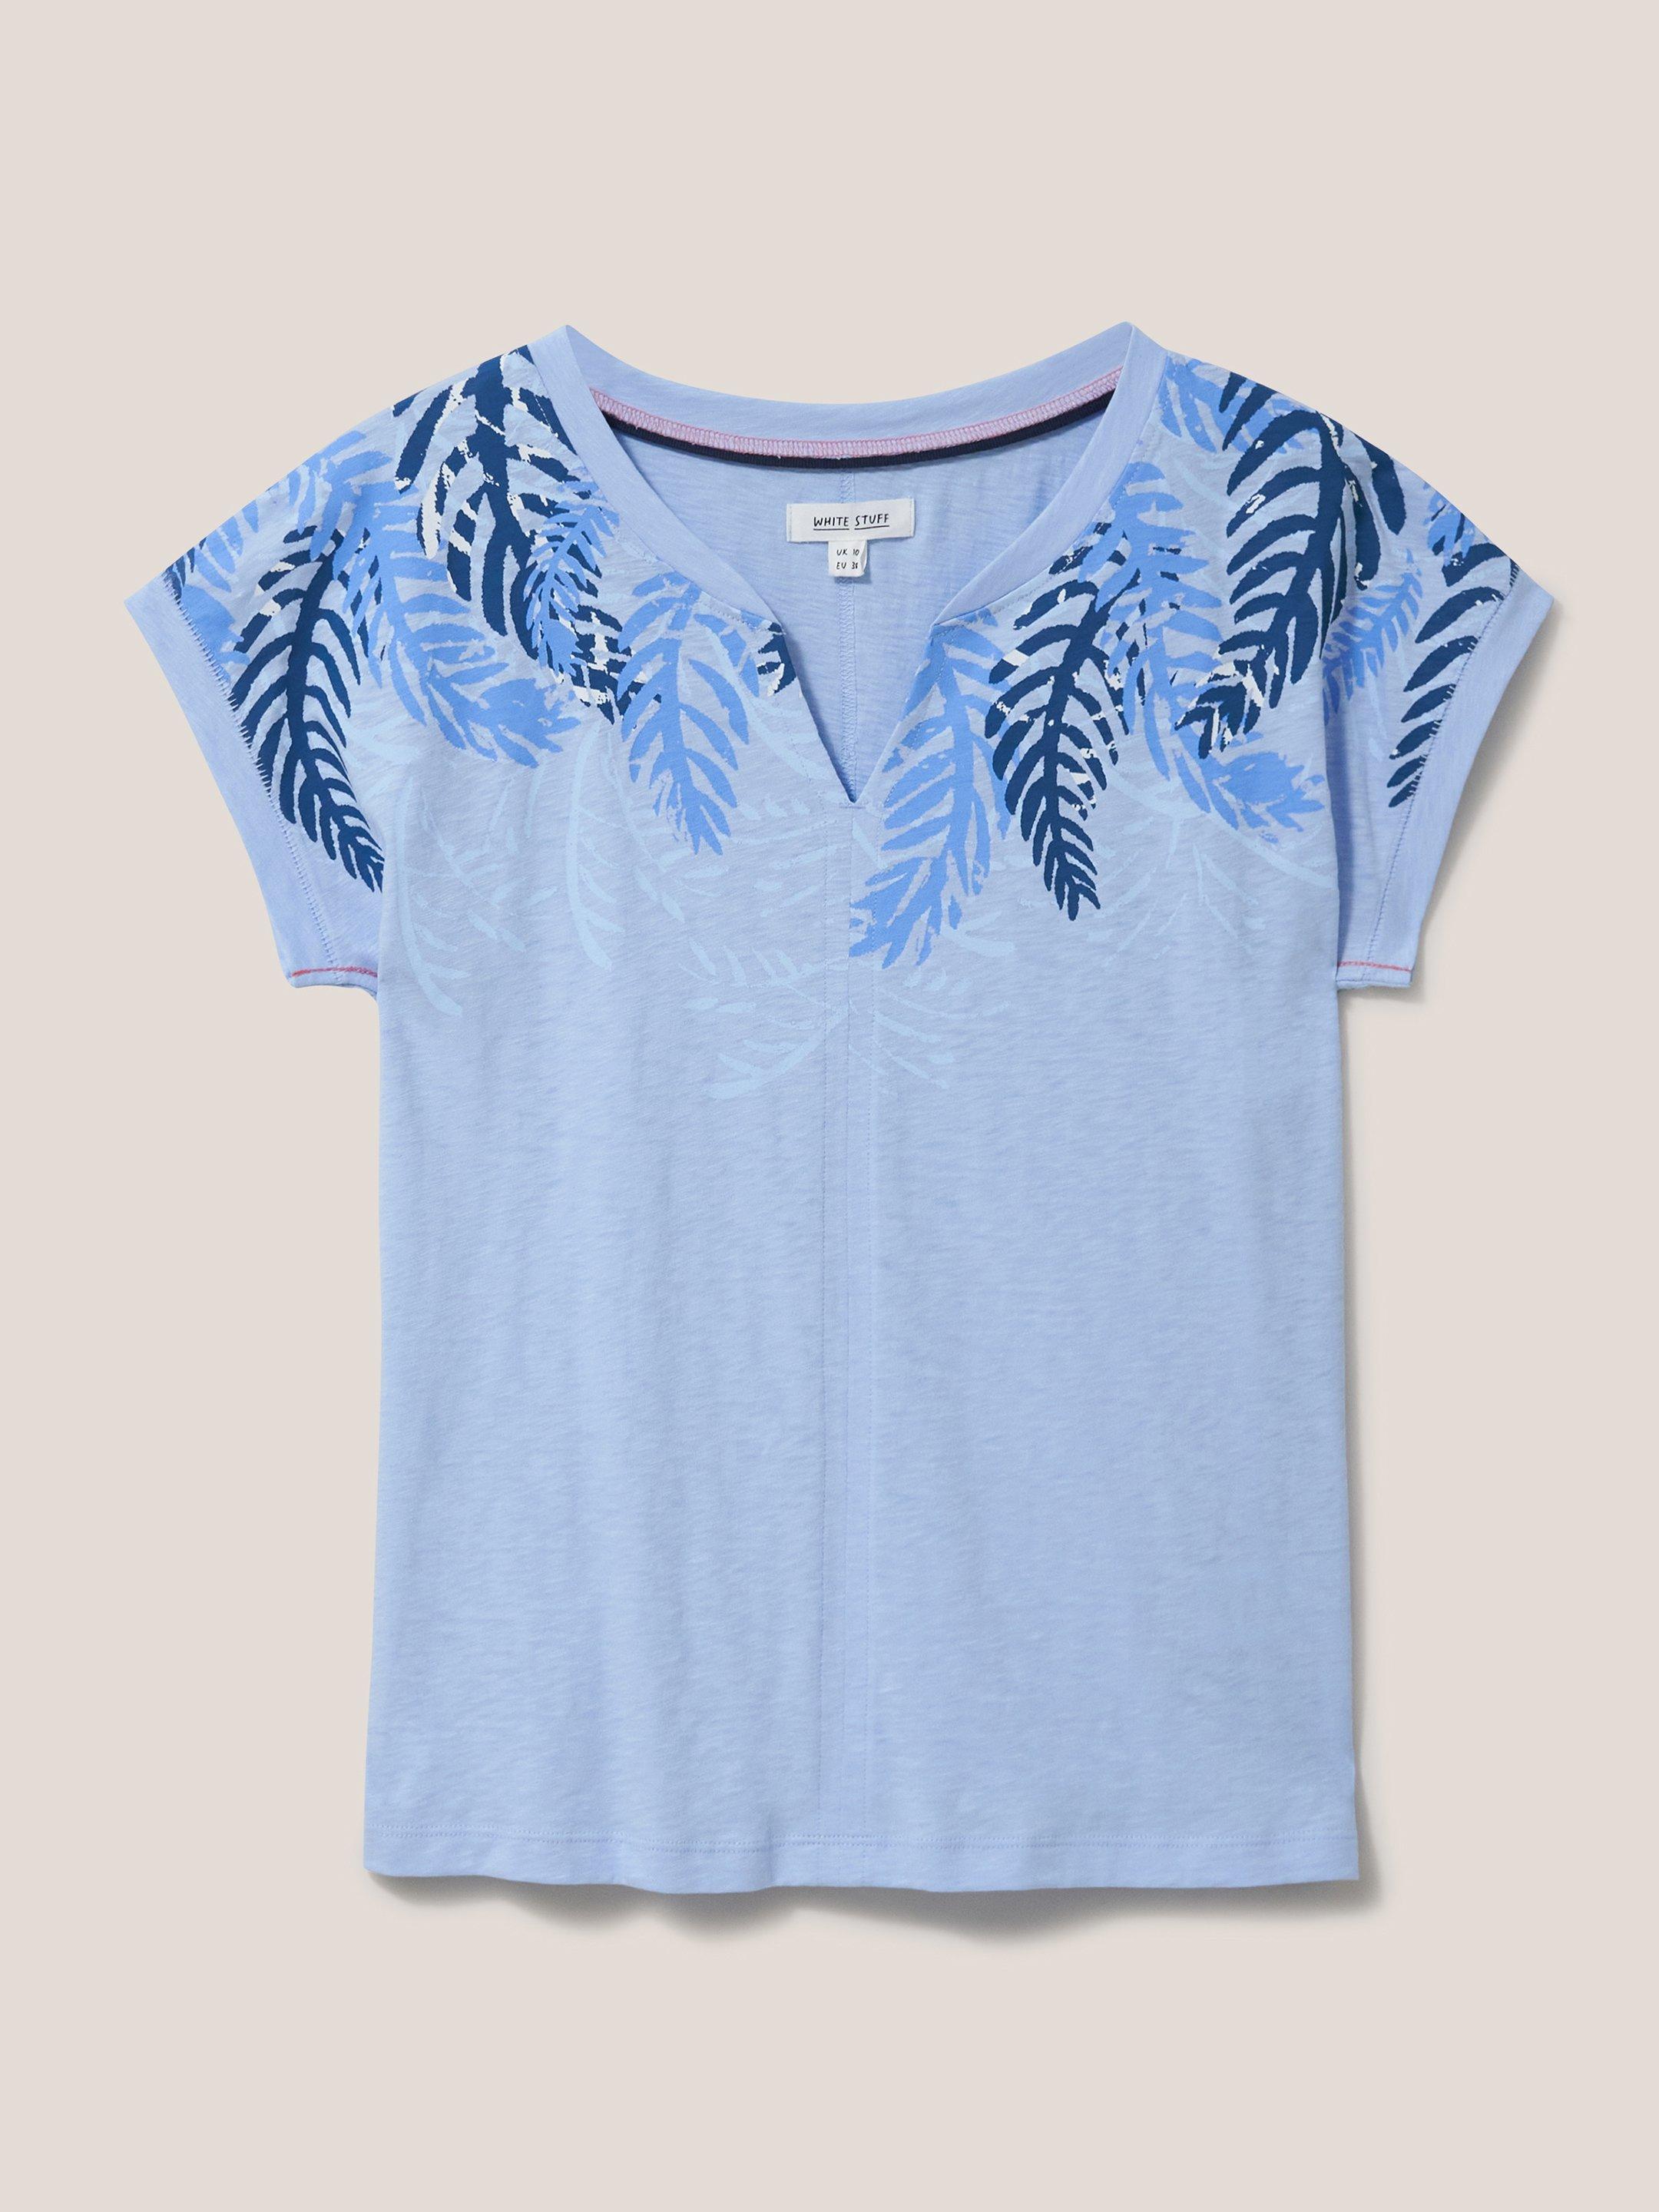 Nelly Print Teeshirt in BLUE MLT - FLAT FRONT